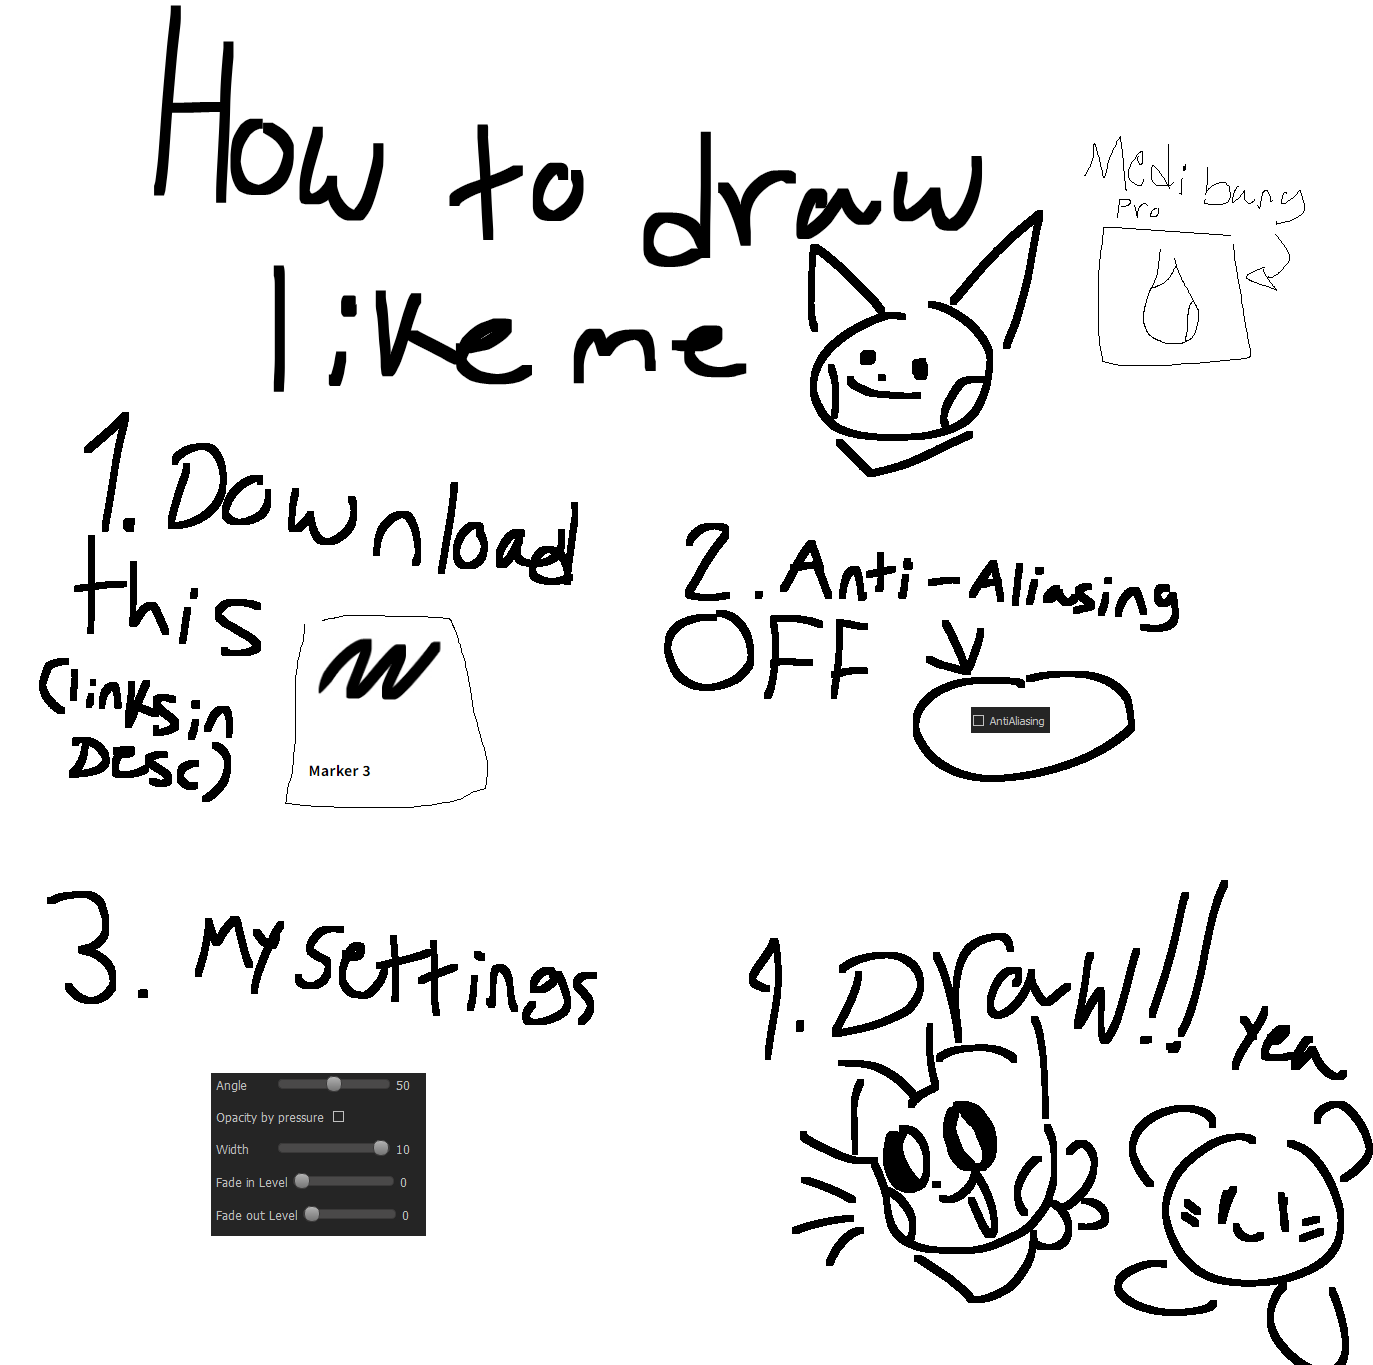 EX: How to draw like me by LoganStudiosART on DeviantArt